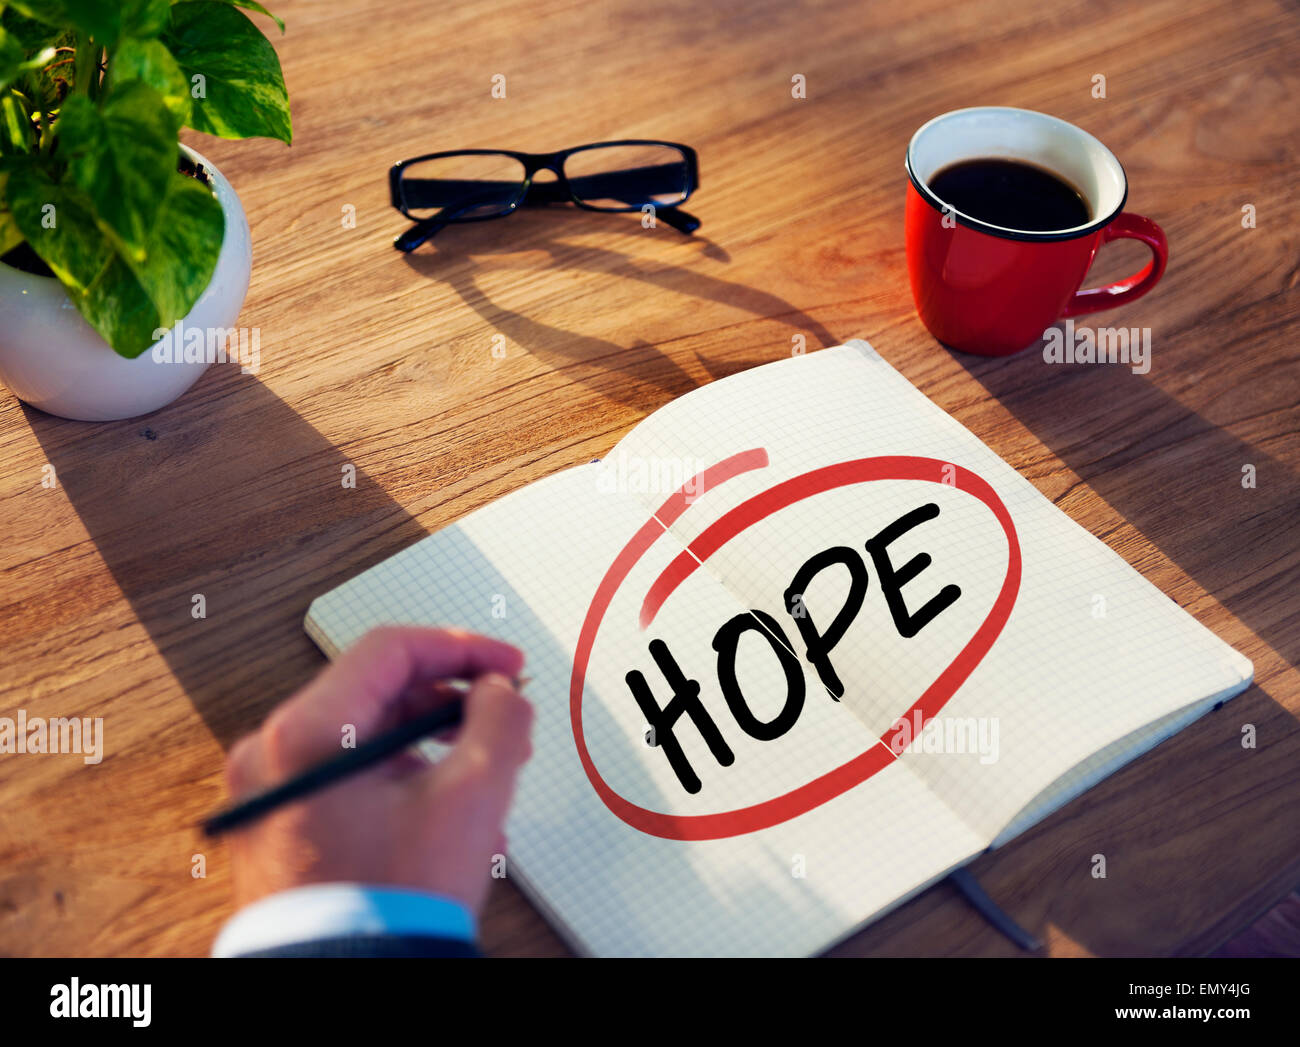 Man with Note Pad and Hope Concept Stock Photo